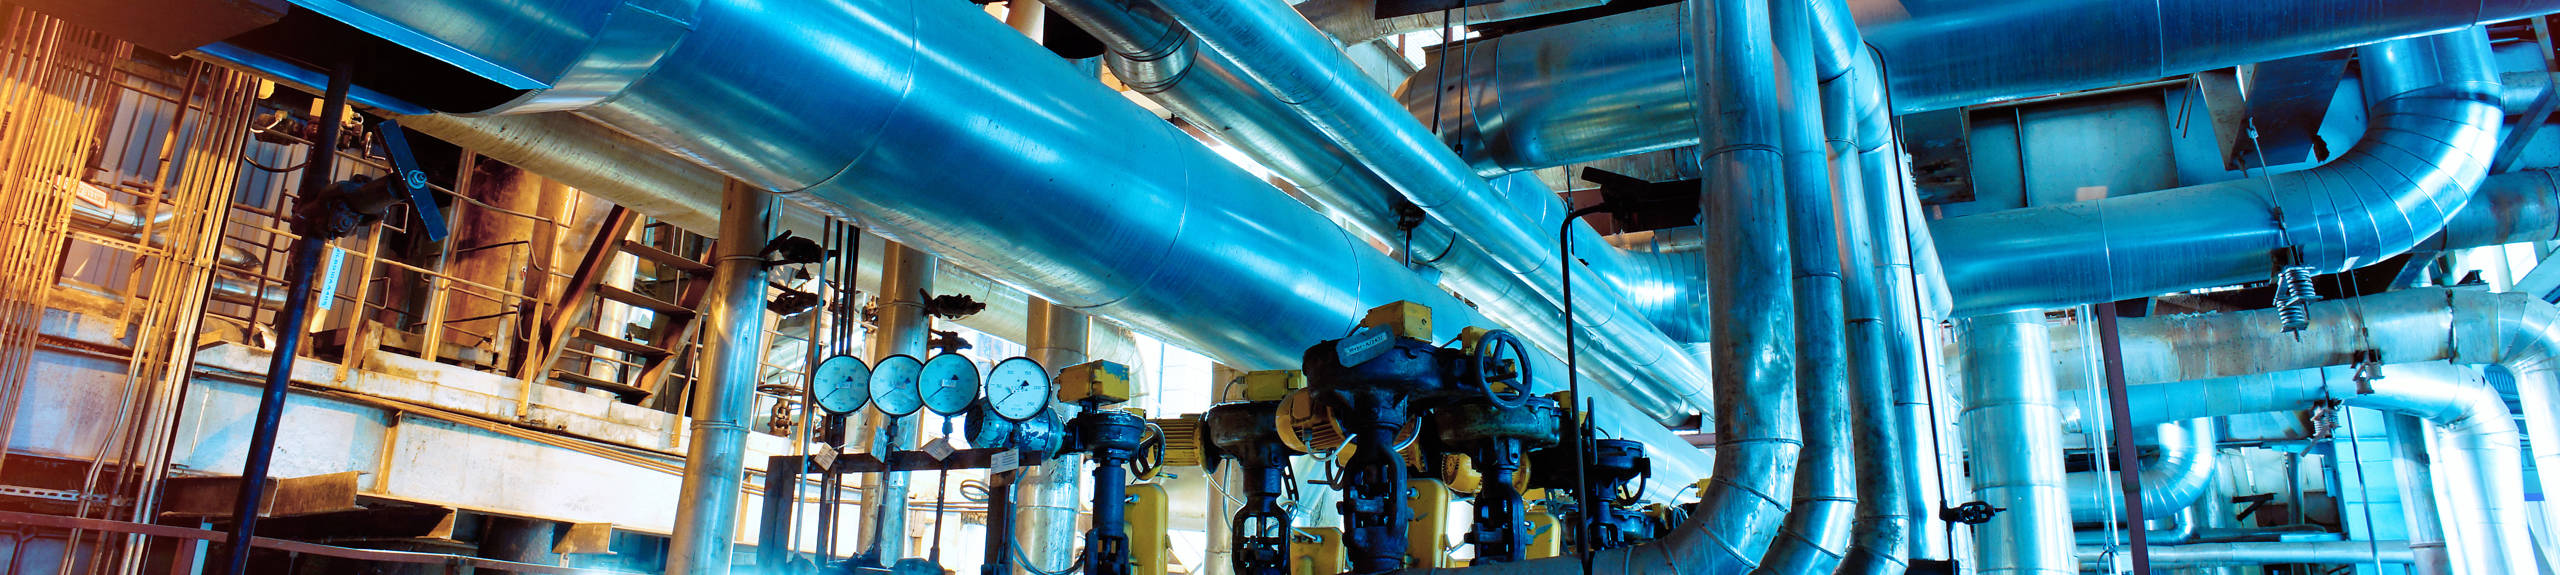 Machinery with large metal pipes and multiple pressure gauges inside of an industrial plant.